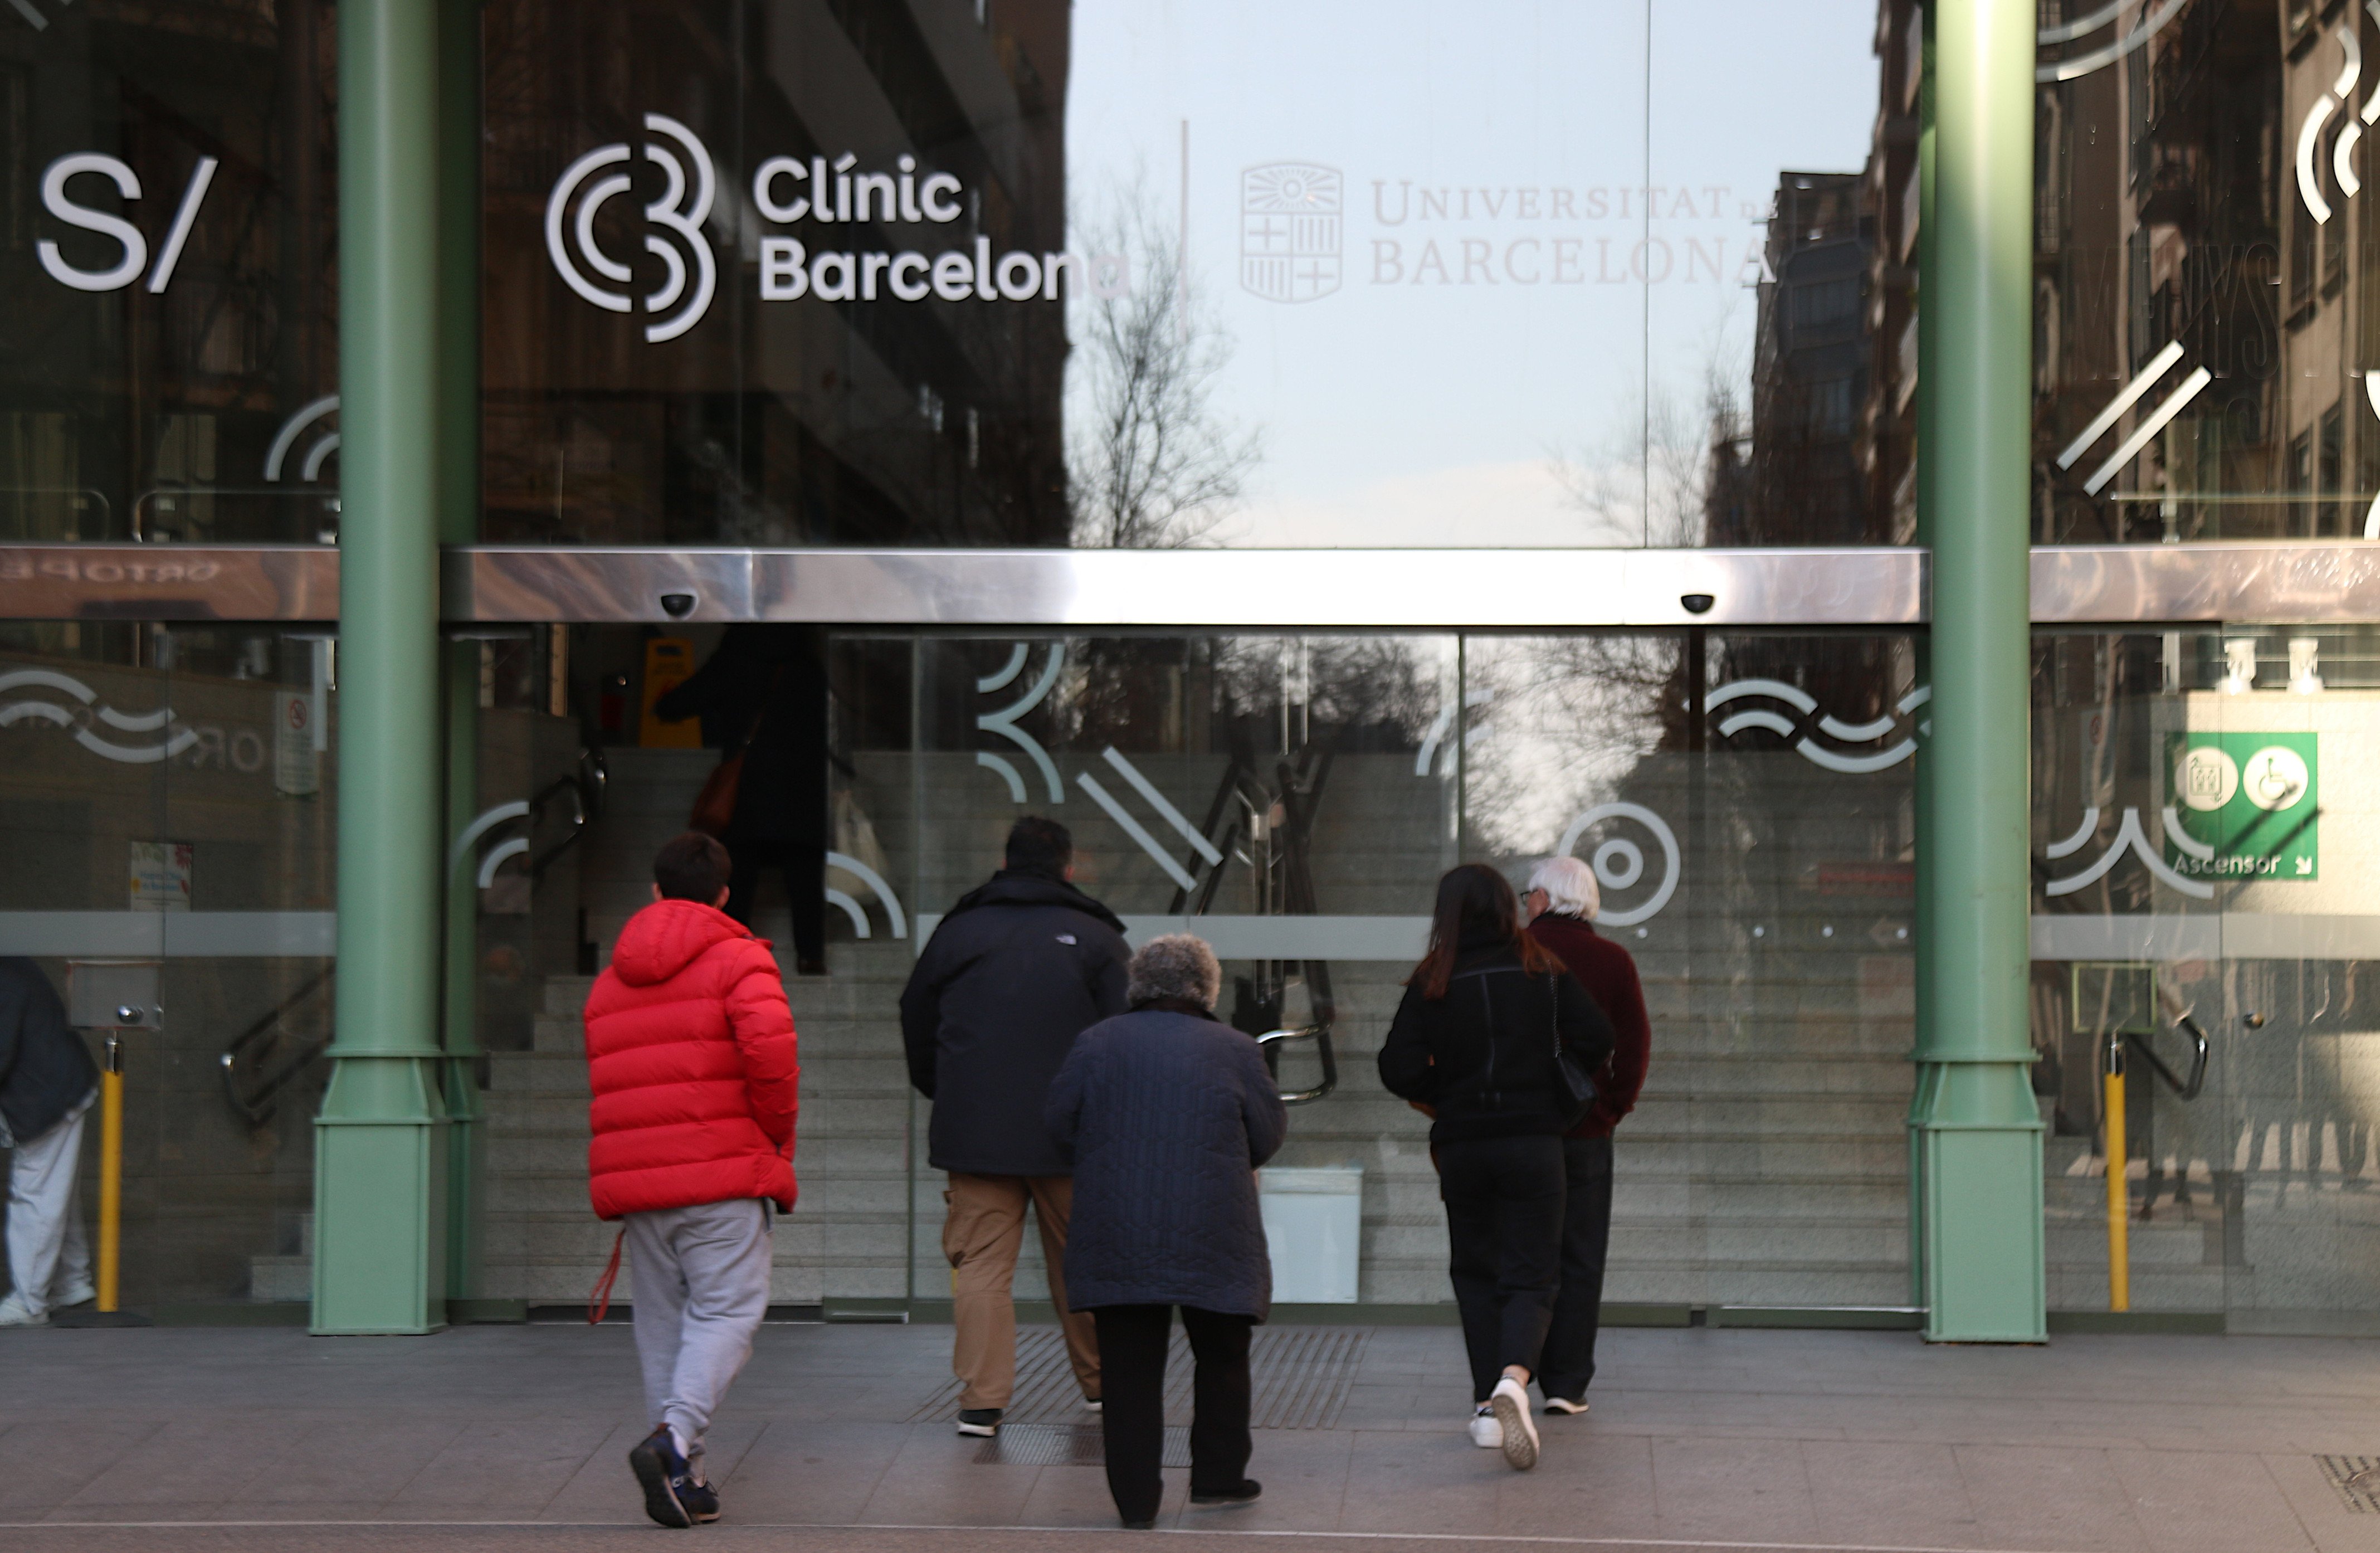 The cyberattack that has paralysed Barcelona's Hospital Clínic: "No ransom will be paid"